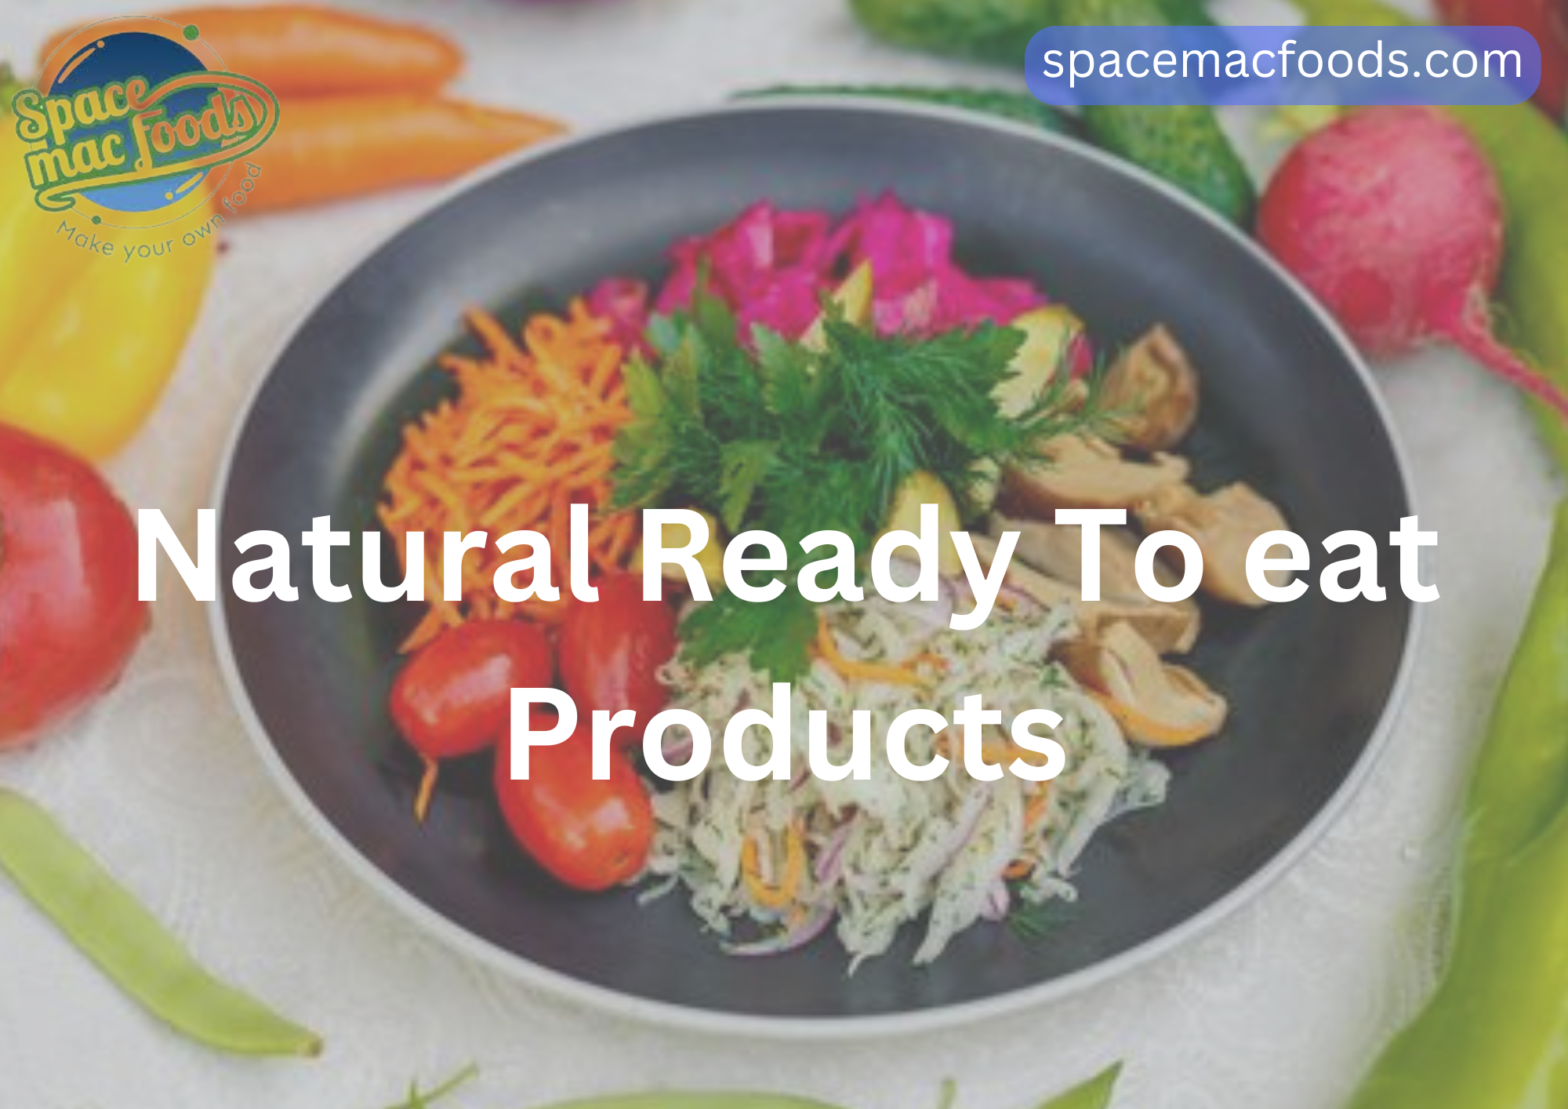 Natural Ready To eat Products